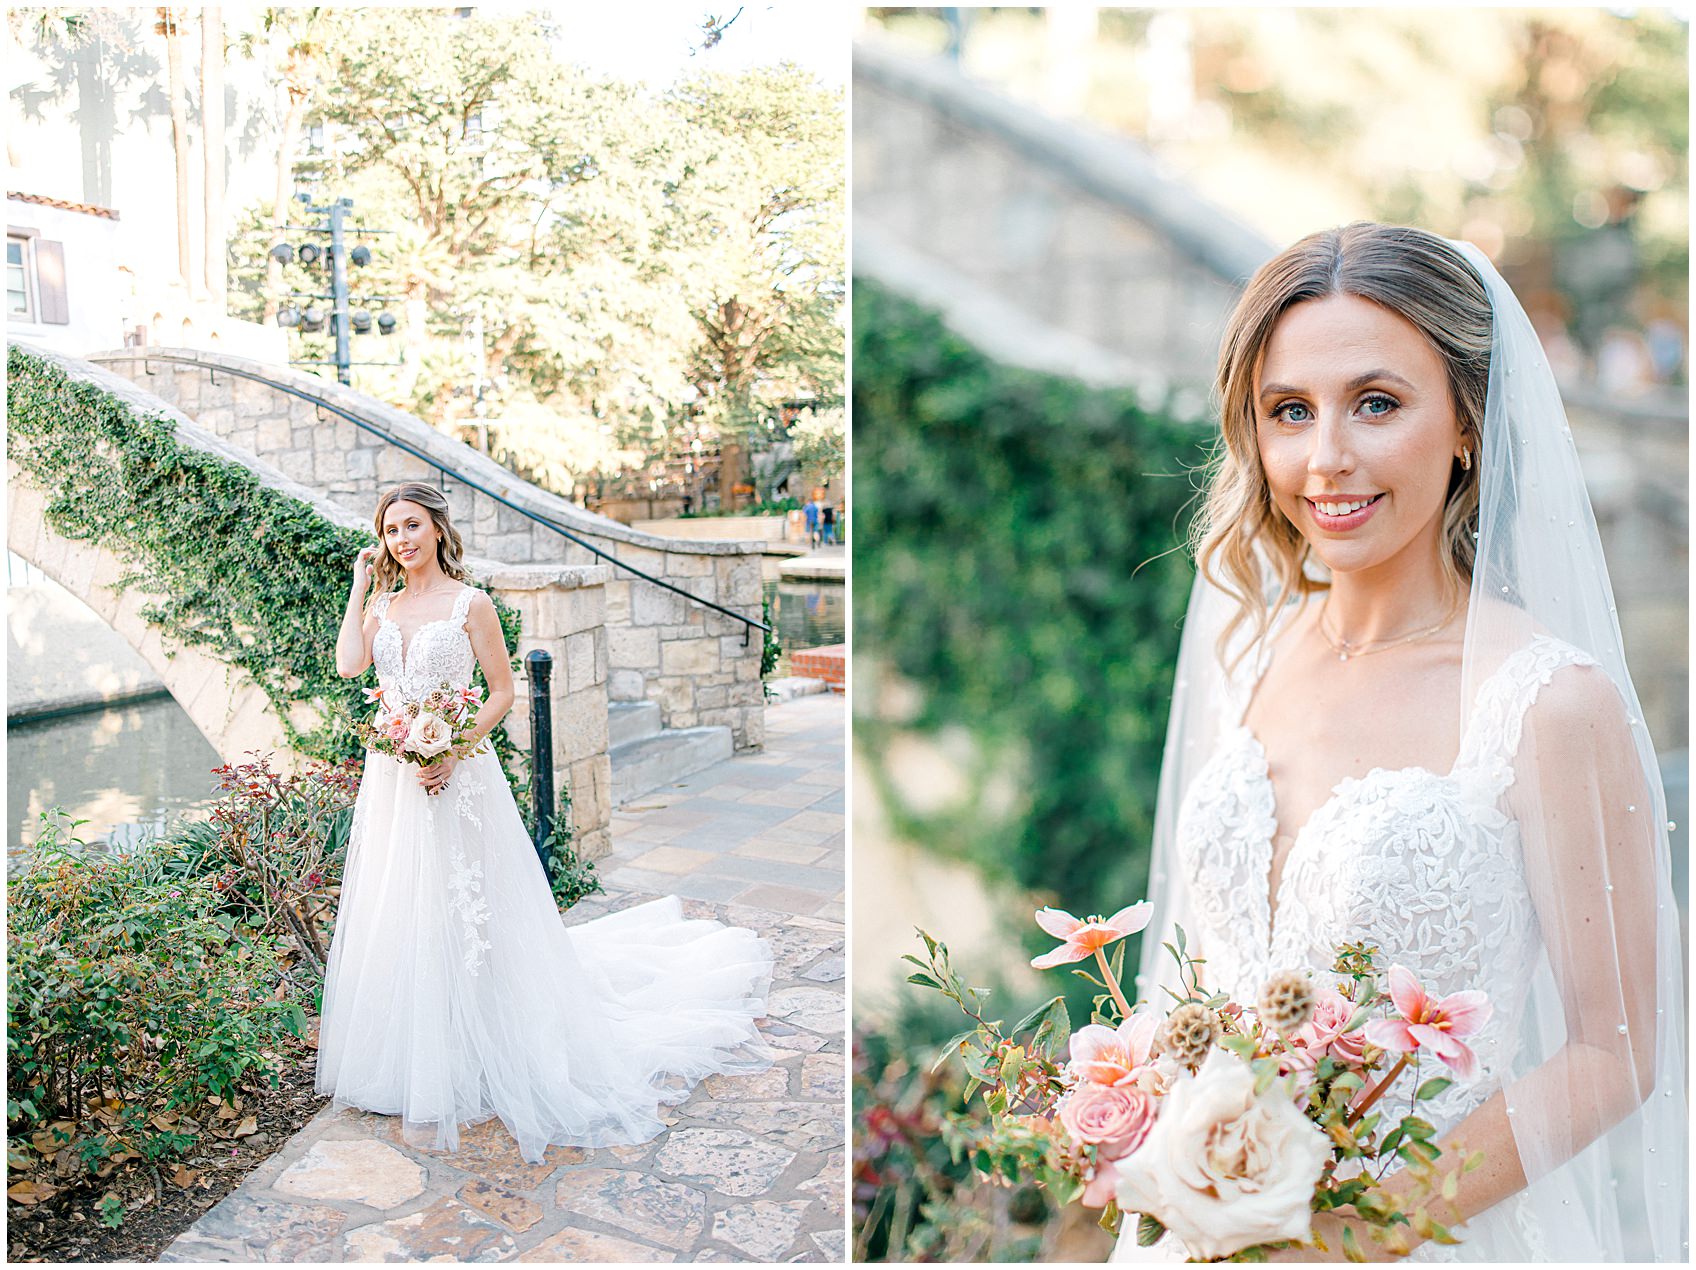 Downtown San Antonio Bridal Photography Session by Allison Jeffers Wedding Photography 0004